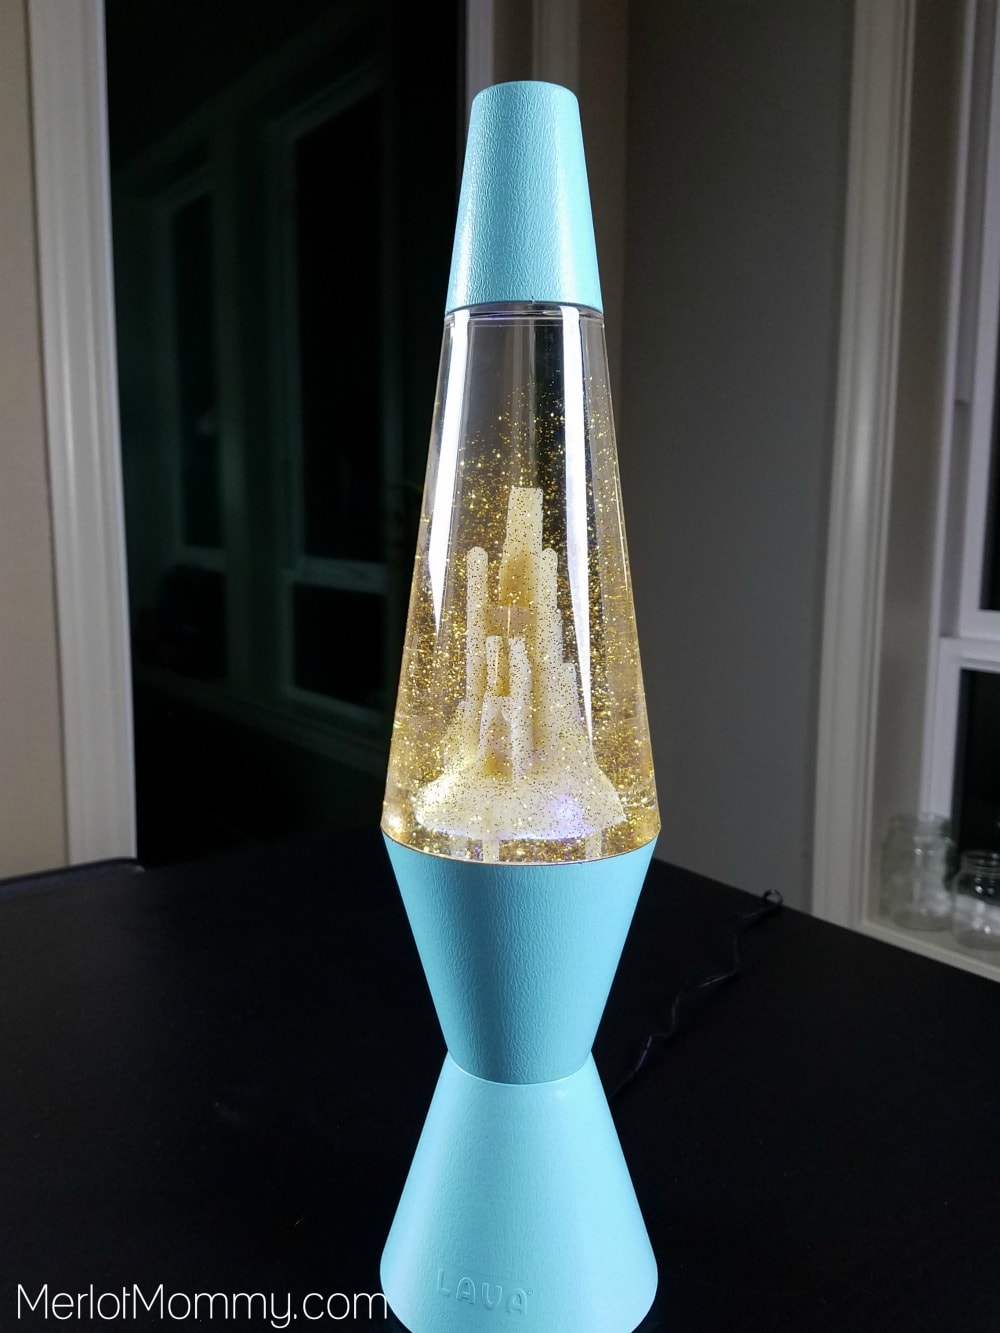 Lava Lamps are Great Holiday Gifts